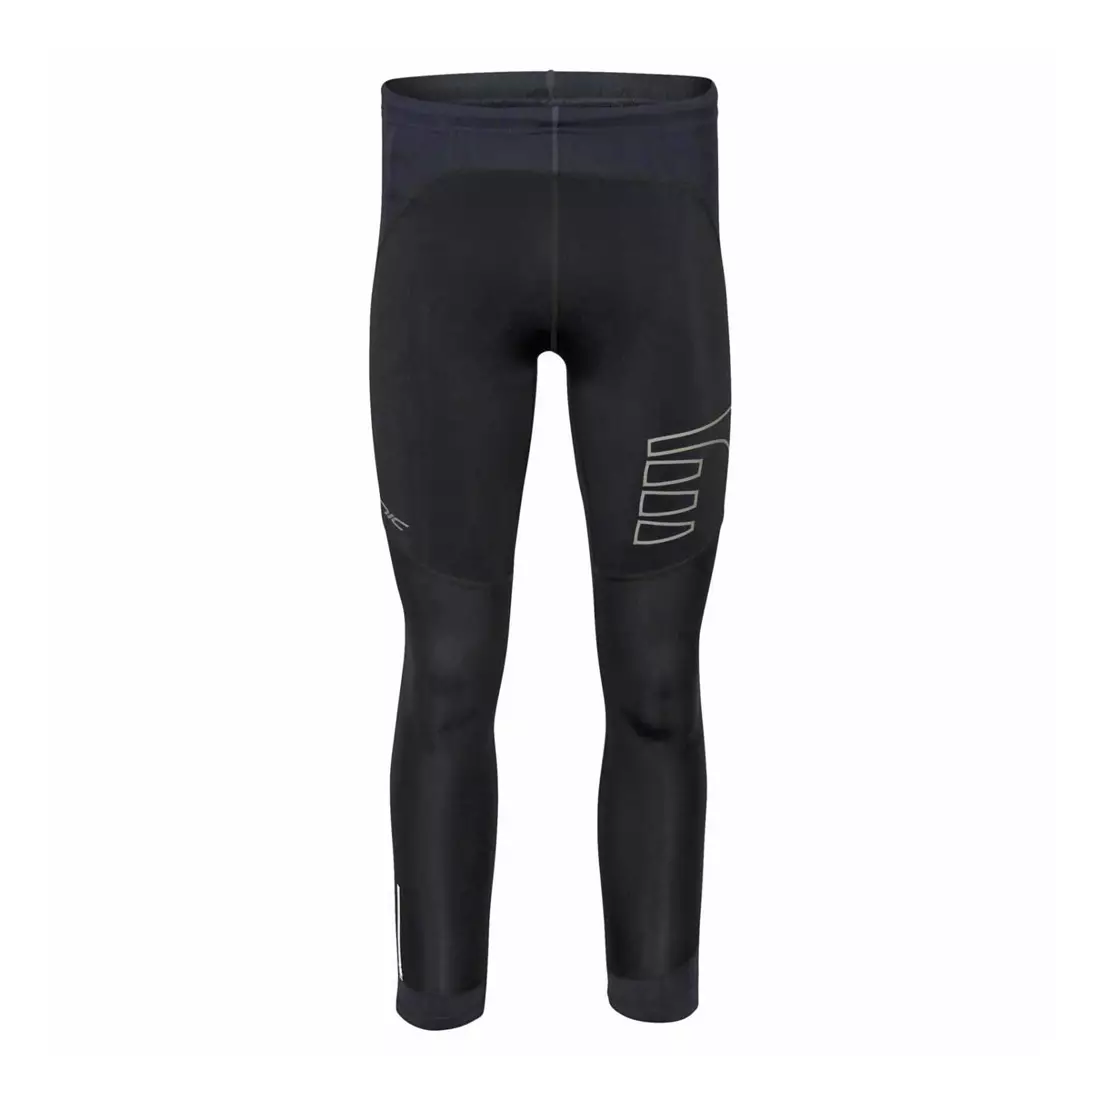 NEWLINE ICONIC FEATHER TIGHTS 11449-184 - men's running pants, color: black